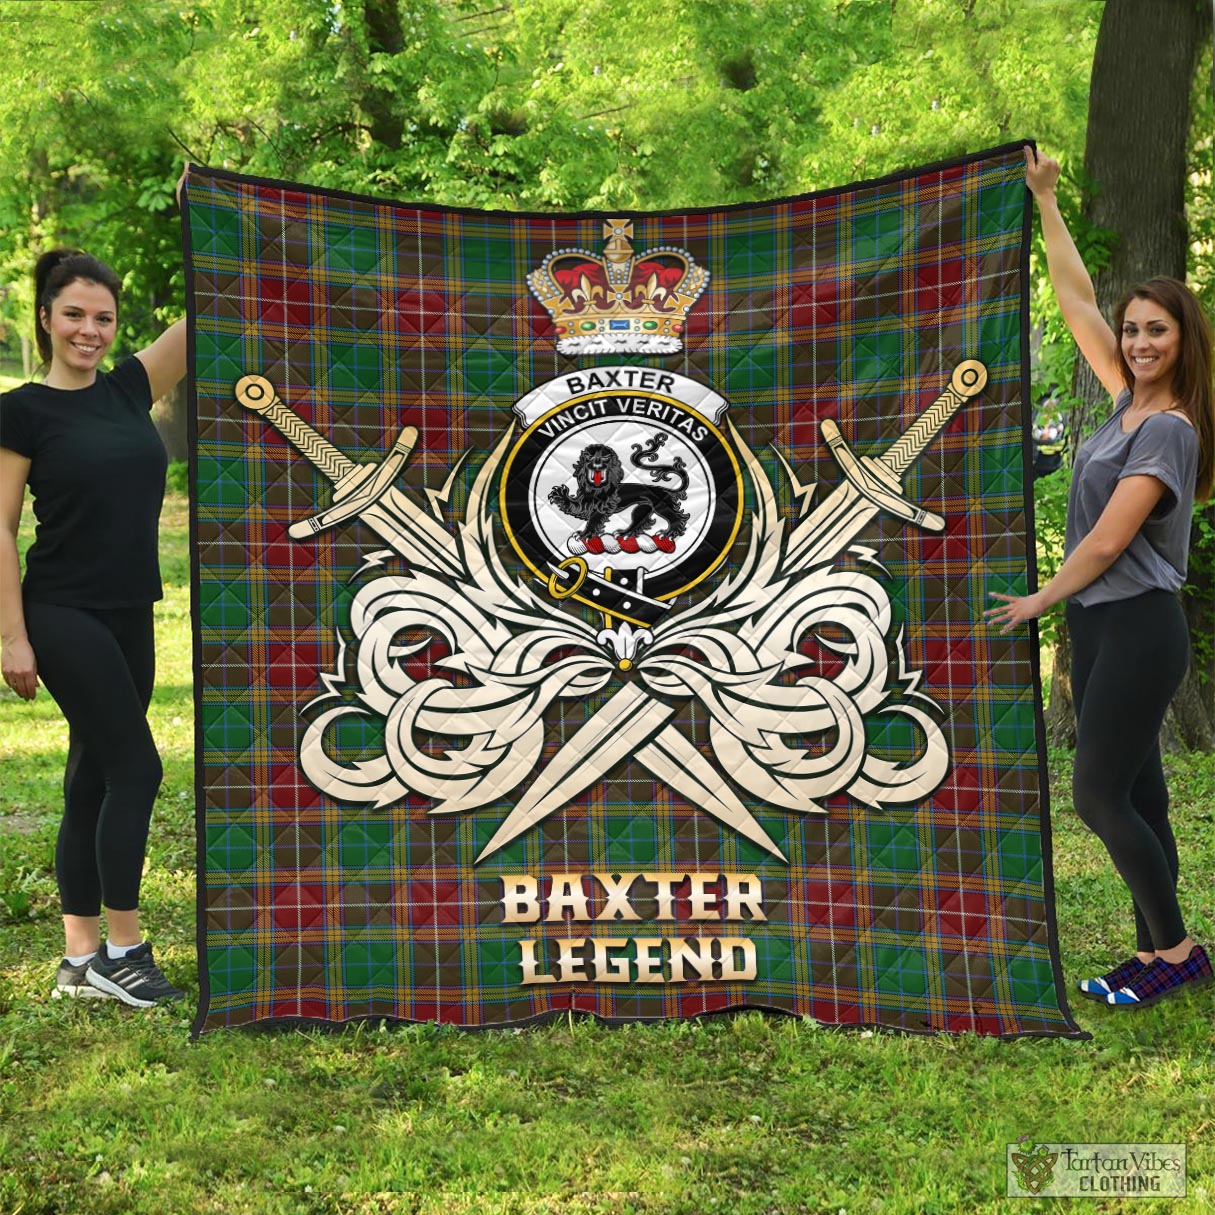 Tartan Vibes Clothing Baxter Tartan Quilt with Clan Crest and the Golden Sword of Courageous Legacy